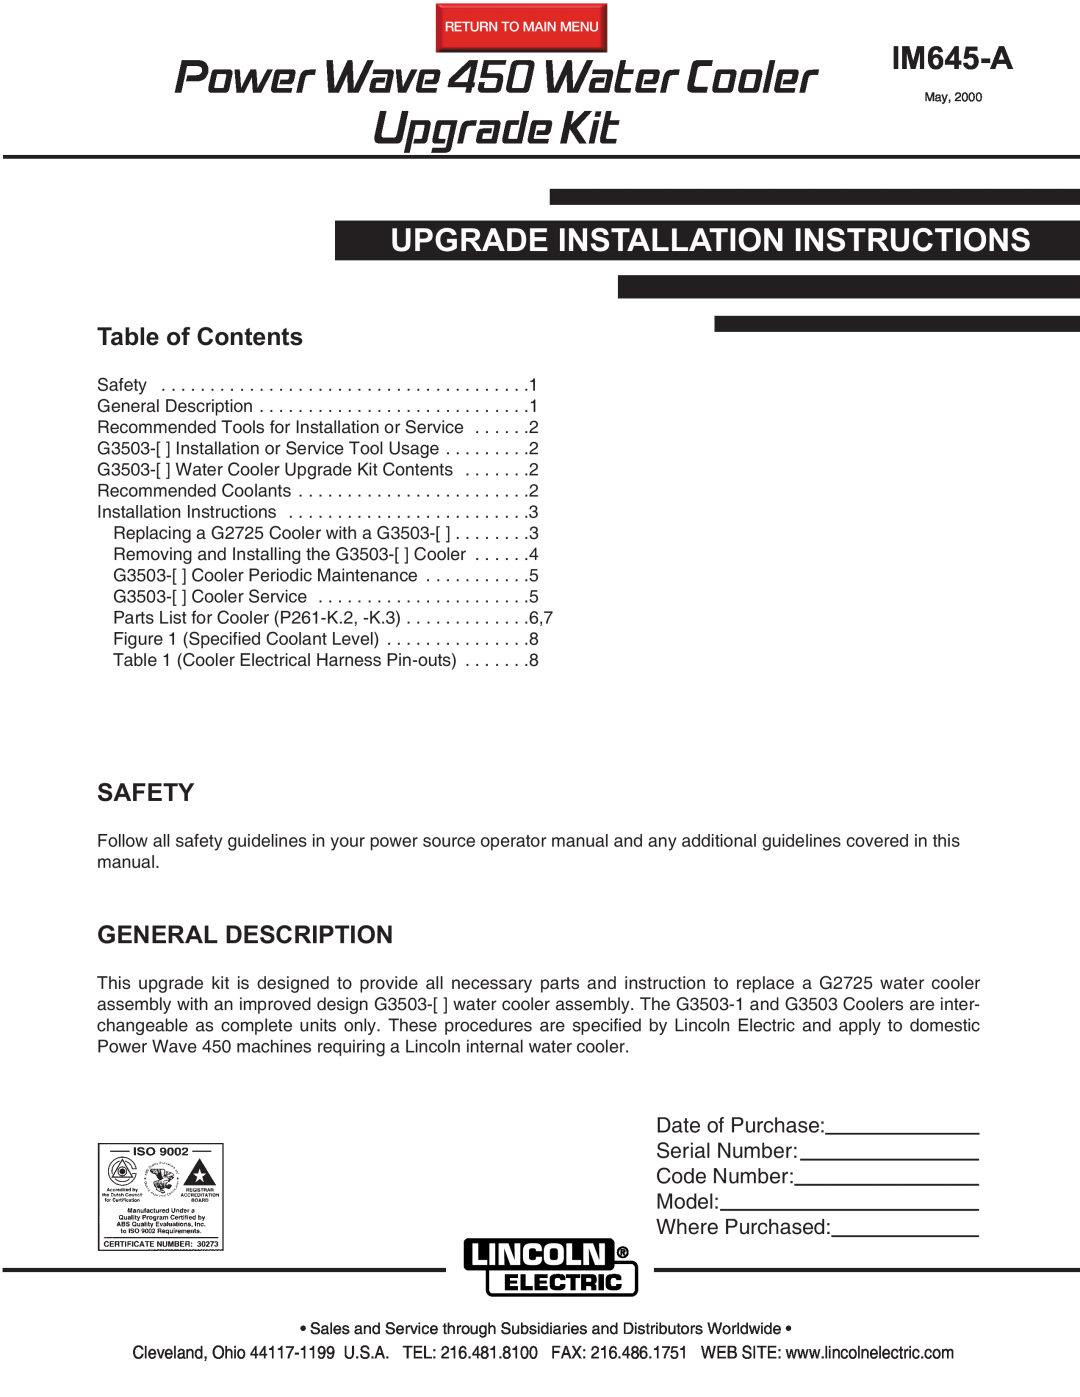 Lincoln Electric IM645-A installation instructions Table of Contents, Safety, General Description 